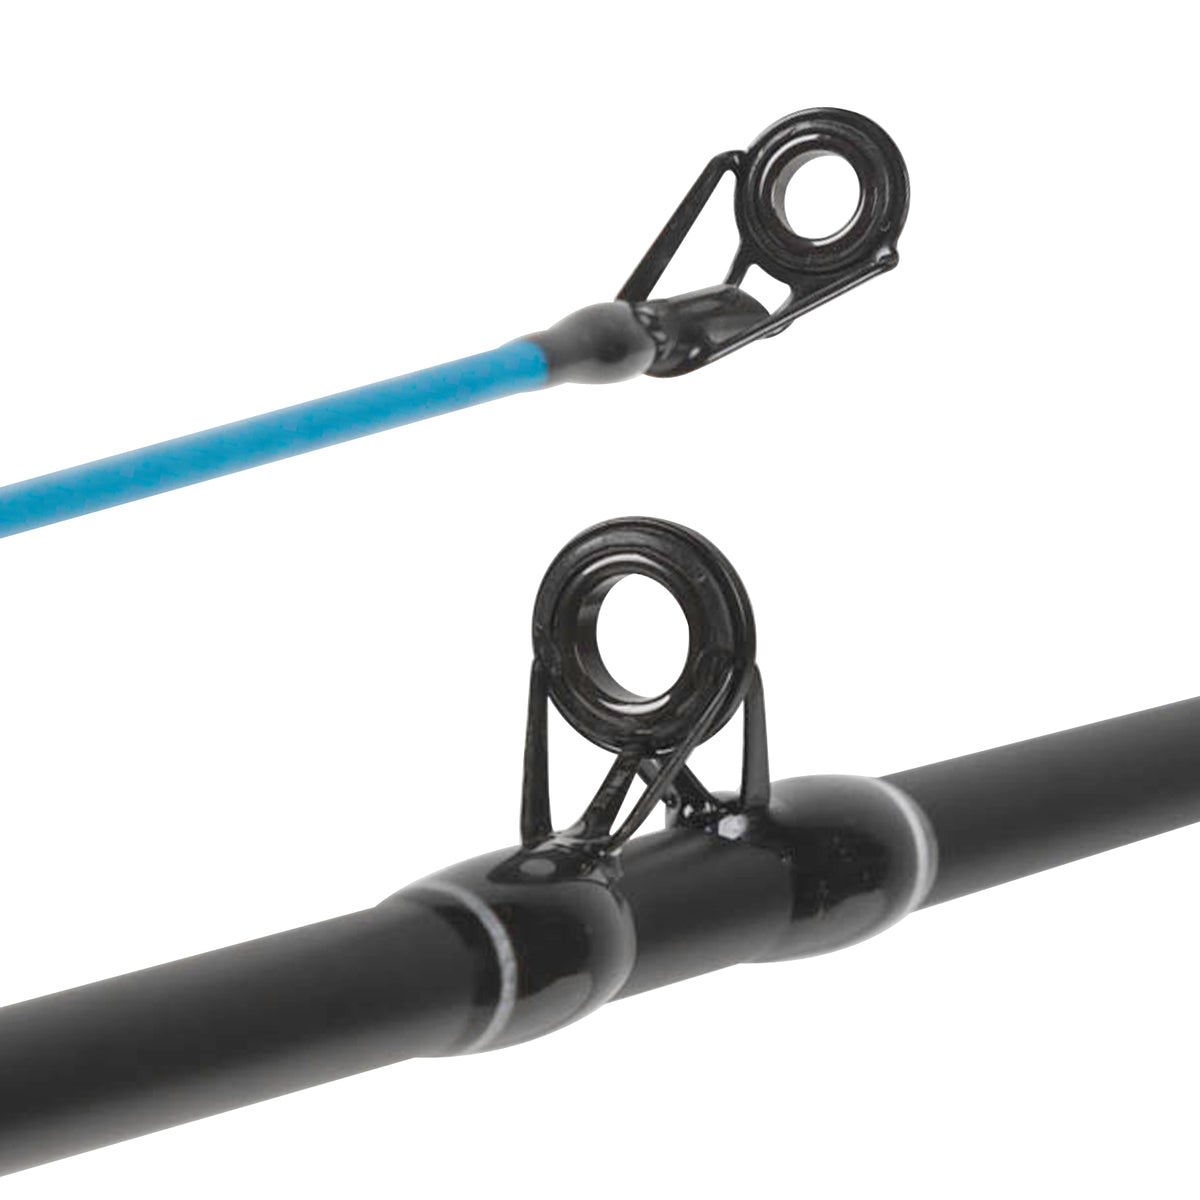 FISHING ROD Combo by Zebco Ready Tackle Spin-cast Reel Includes Tackle  BRAND NEW